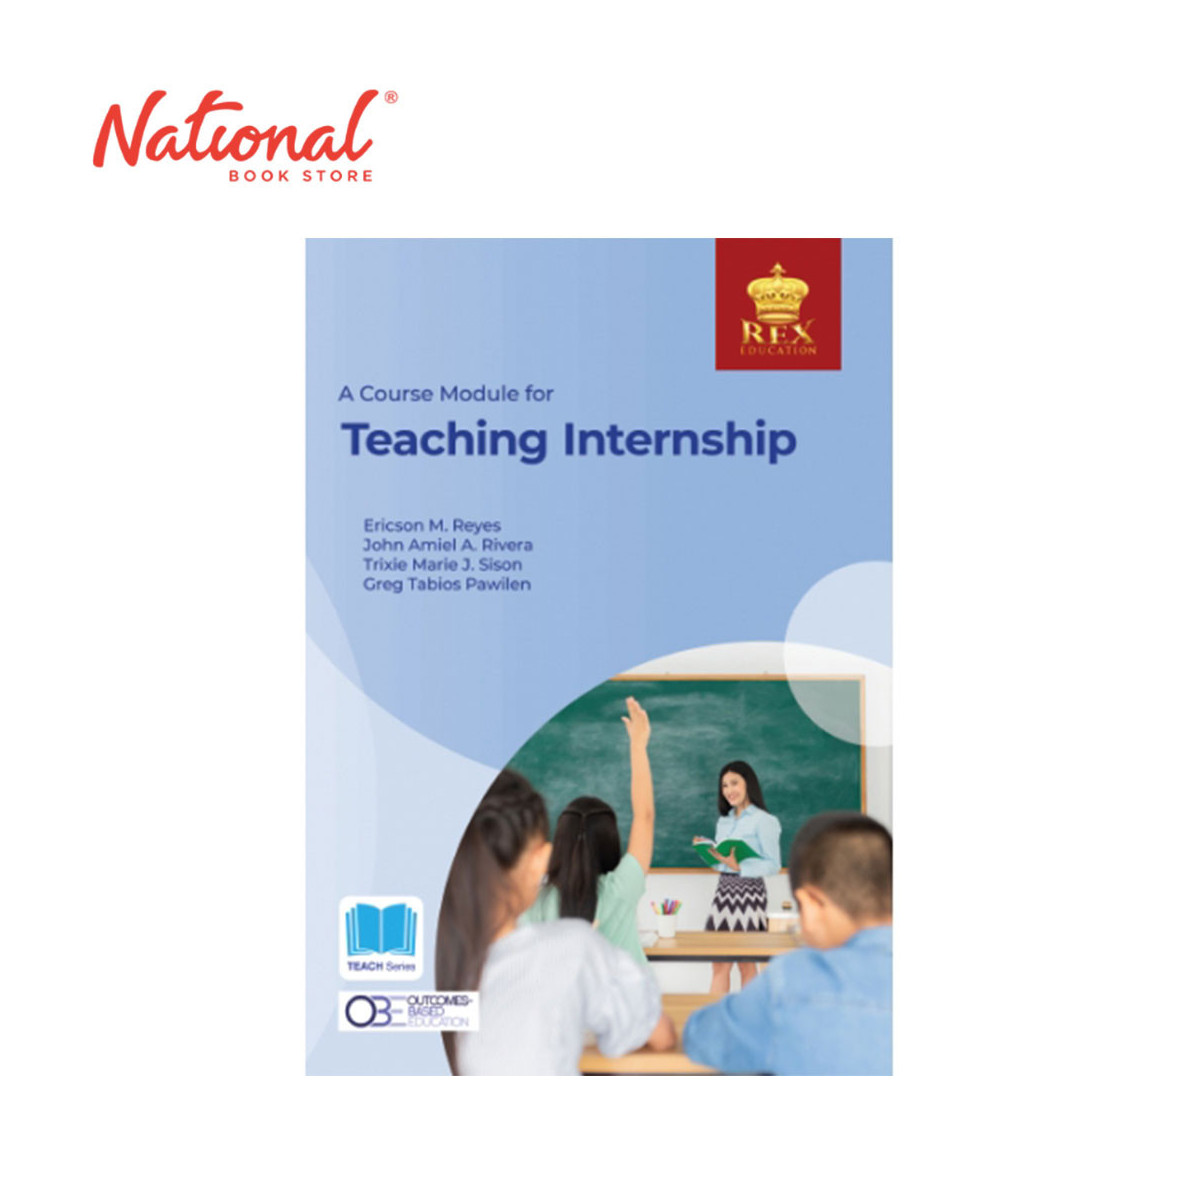 A Course Module for Teaching Internship (2021 Edition) by Ericson M. Reyes, Et. Al - Trade Paperback